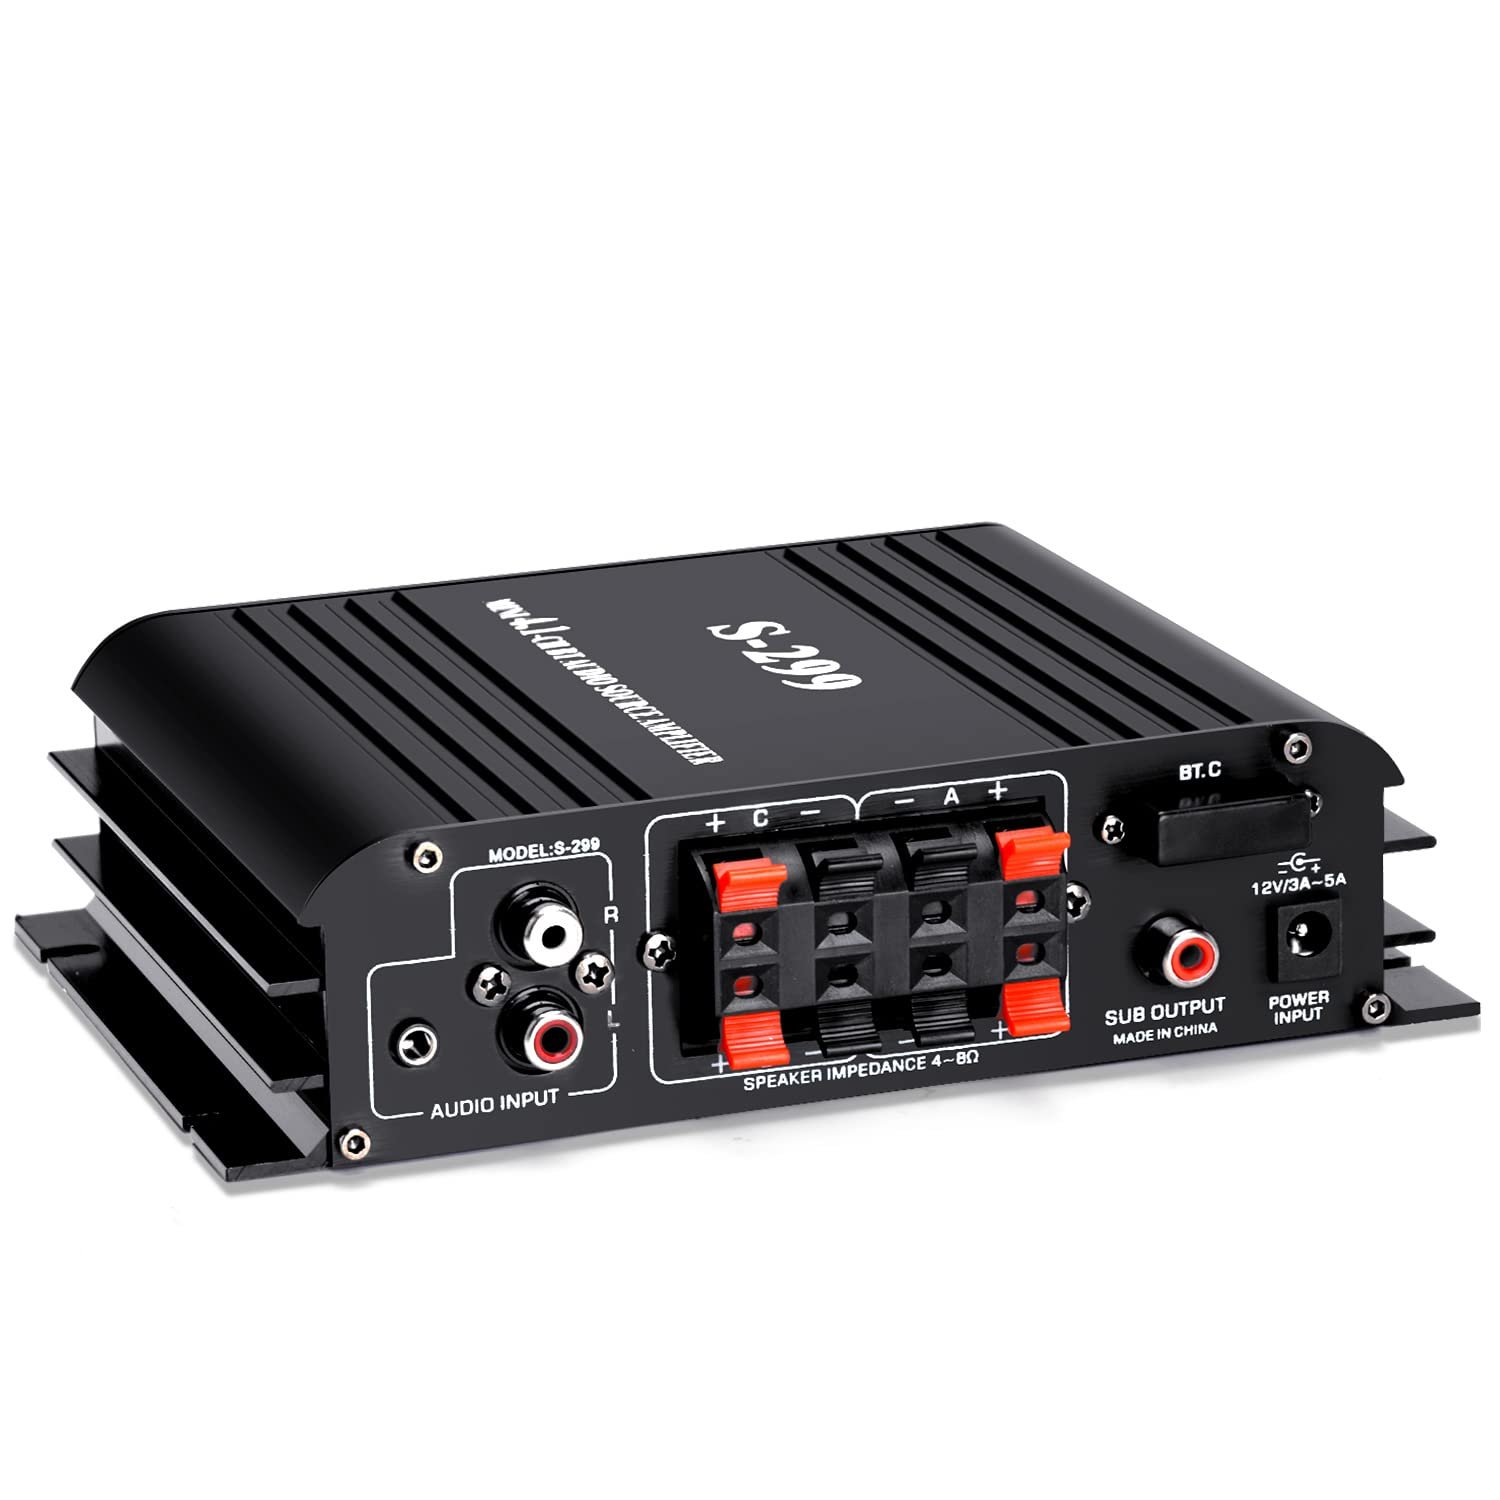 Facmogu S-299 4.1CH Bluetooth Power Amplifier with Active Subwoofer Output (NOT Passive Subwoofer), Max 800W RMS 40Wx4 Subwoofer Amplifier Hi-Fi Integrated Mini Speaker Amp Audio Sub Bass Amp